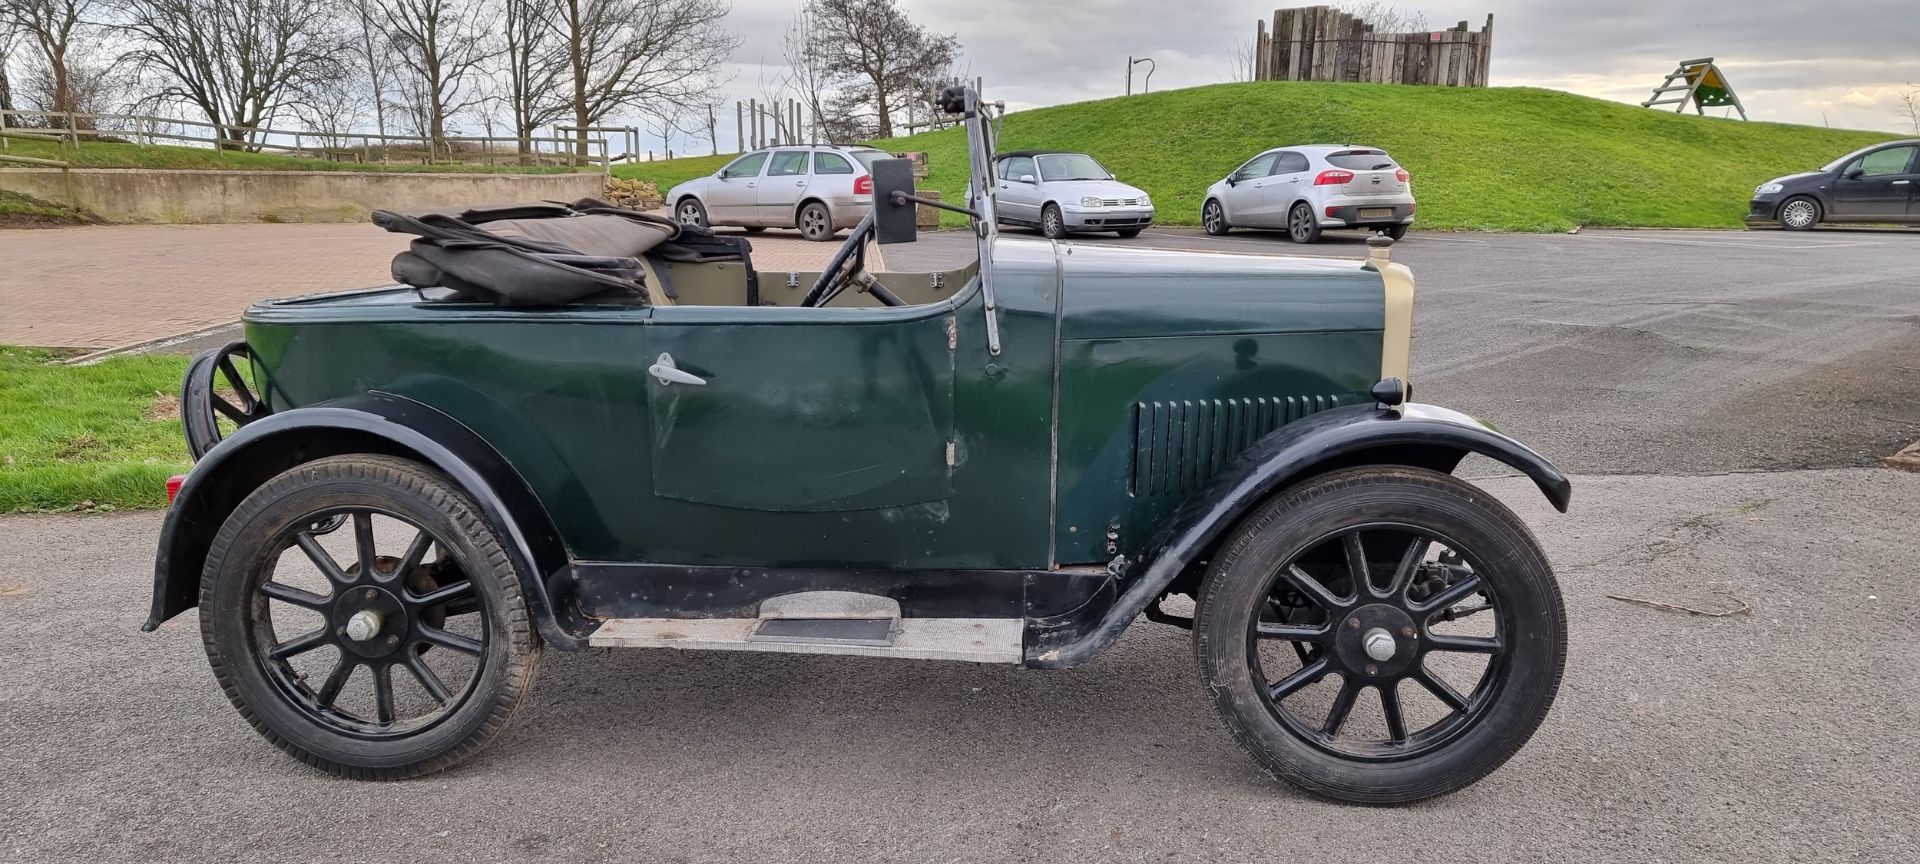 1928 Triumph Super Seven two seater de Luxe, 832cc. Registration number WW 5202. Chassis number - Image 7 of 26